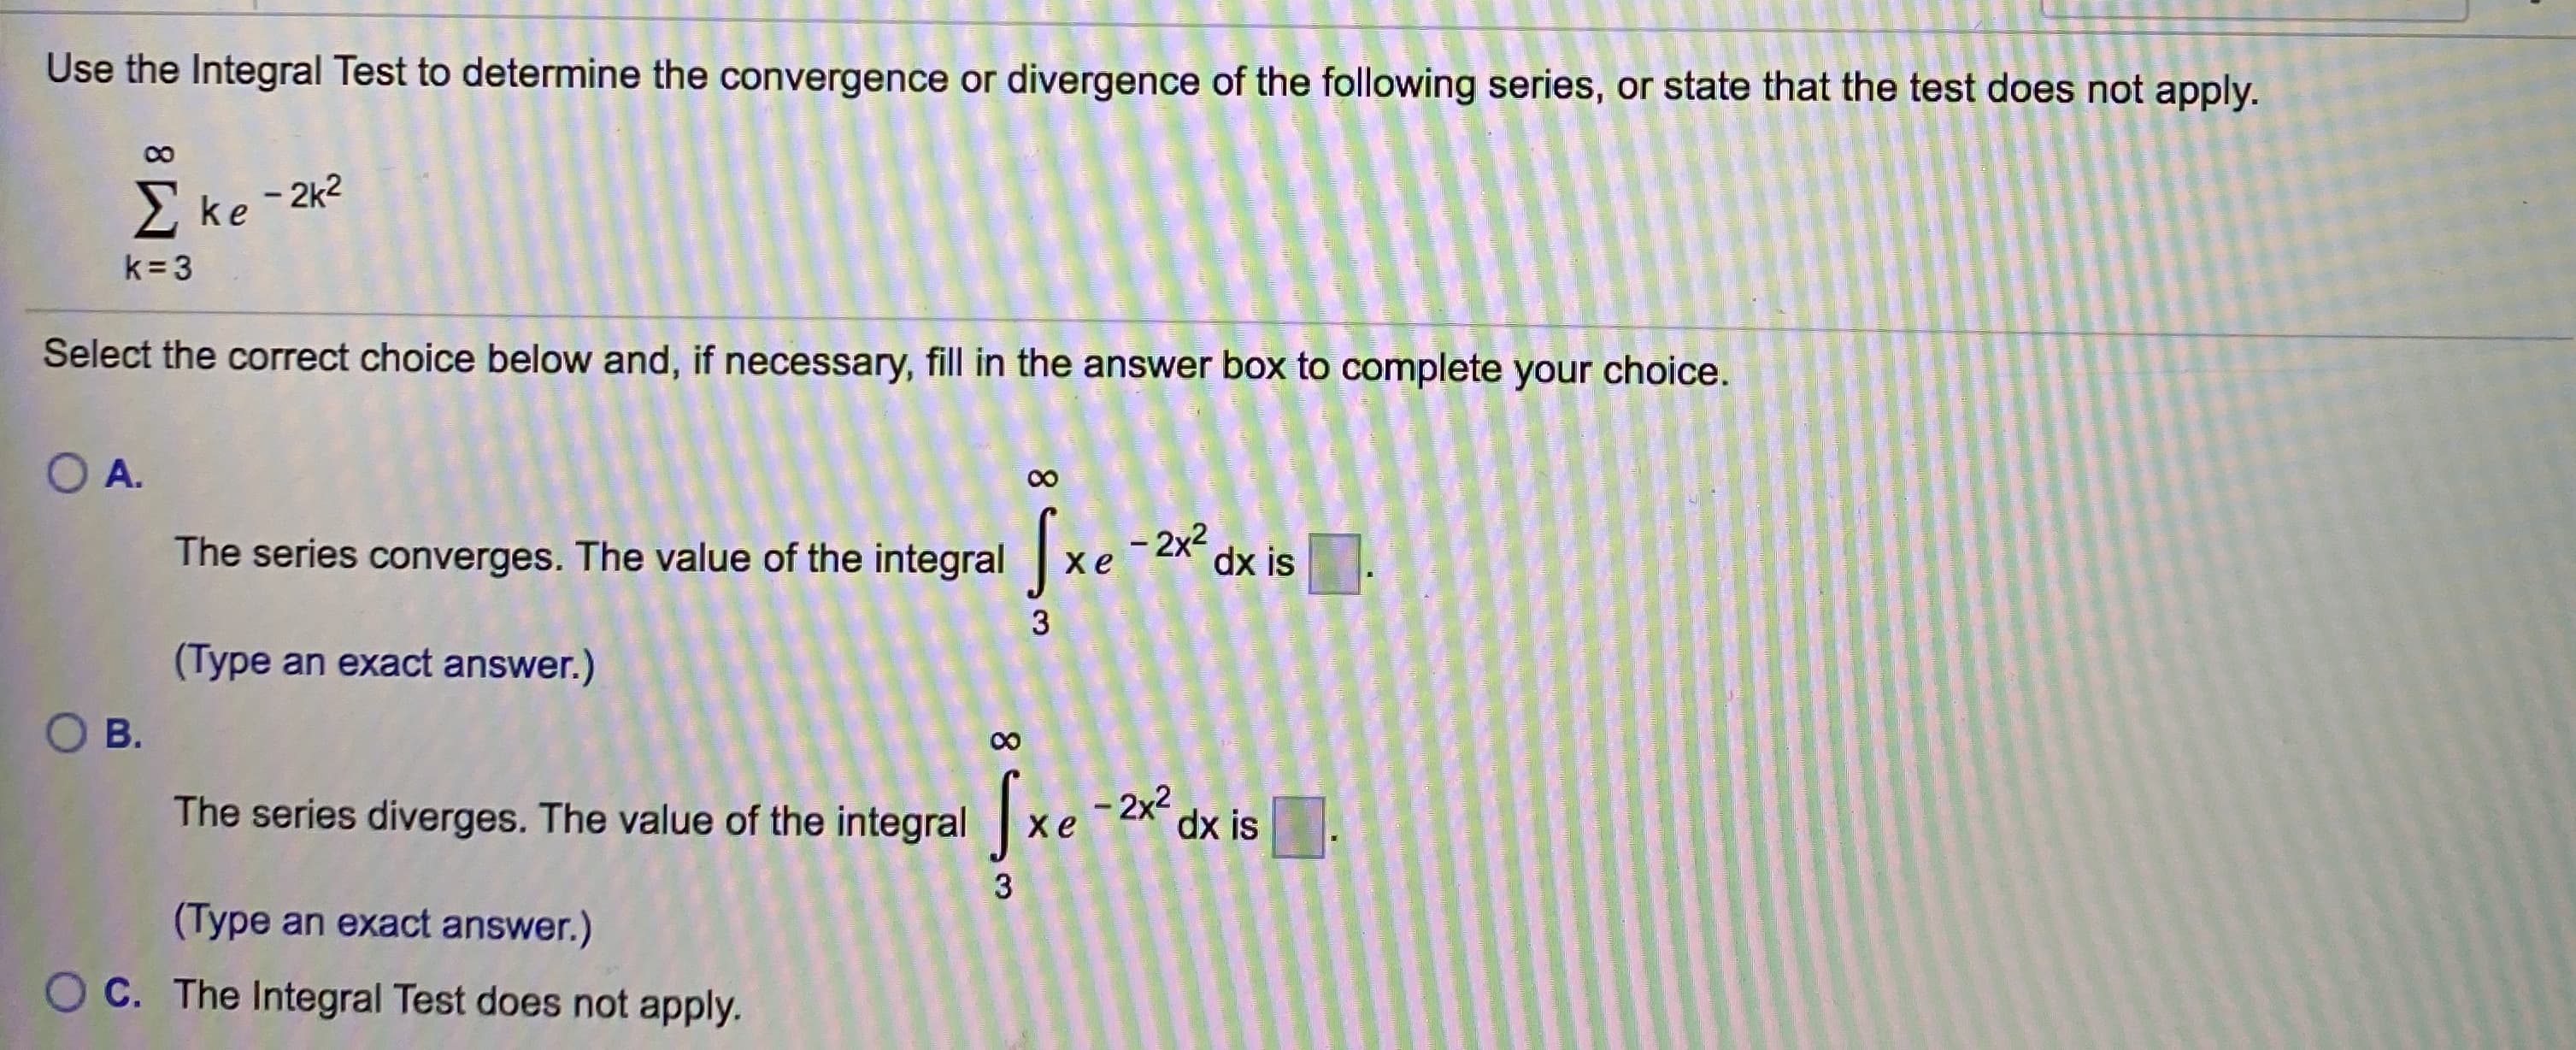 Use the Integral Test to determine the convergence or divergence of the following series, or state that the test does not apply.
